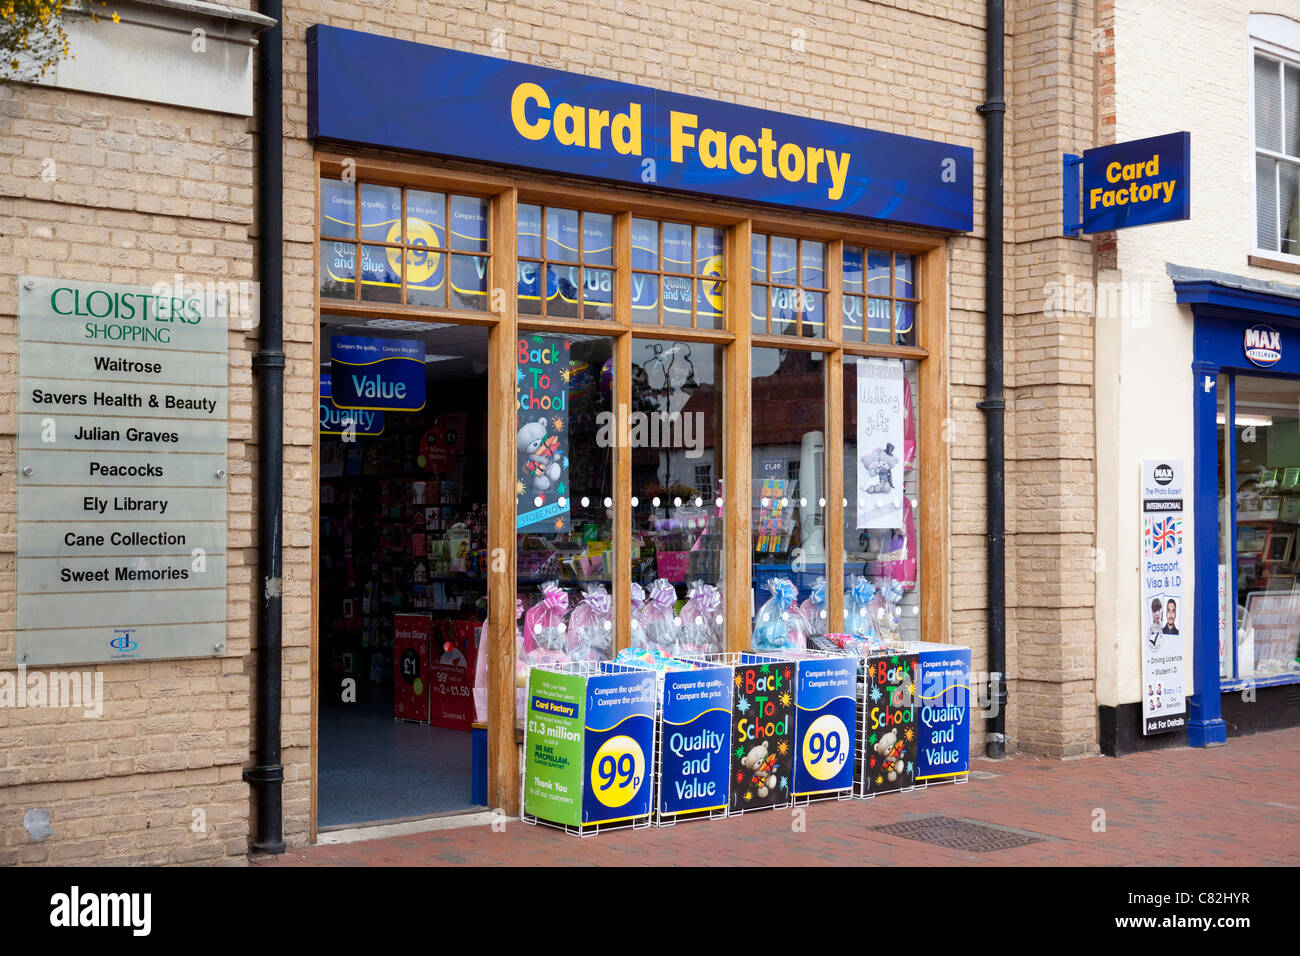 Card Factory store in UK Stock Photo, Royalty Free Image: 39395995 - Alamy